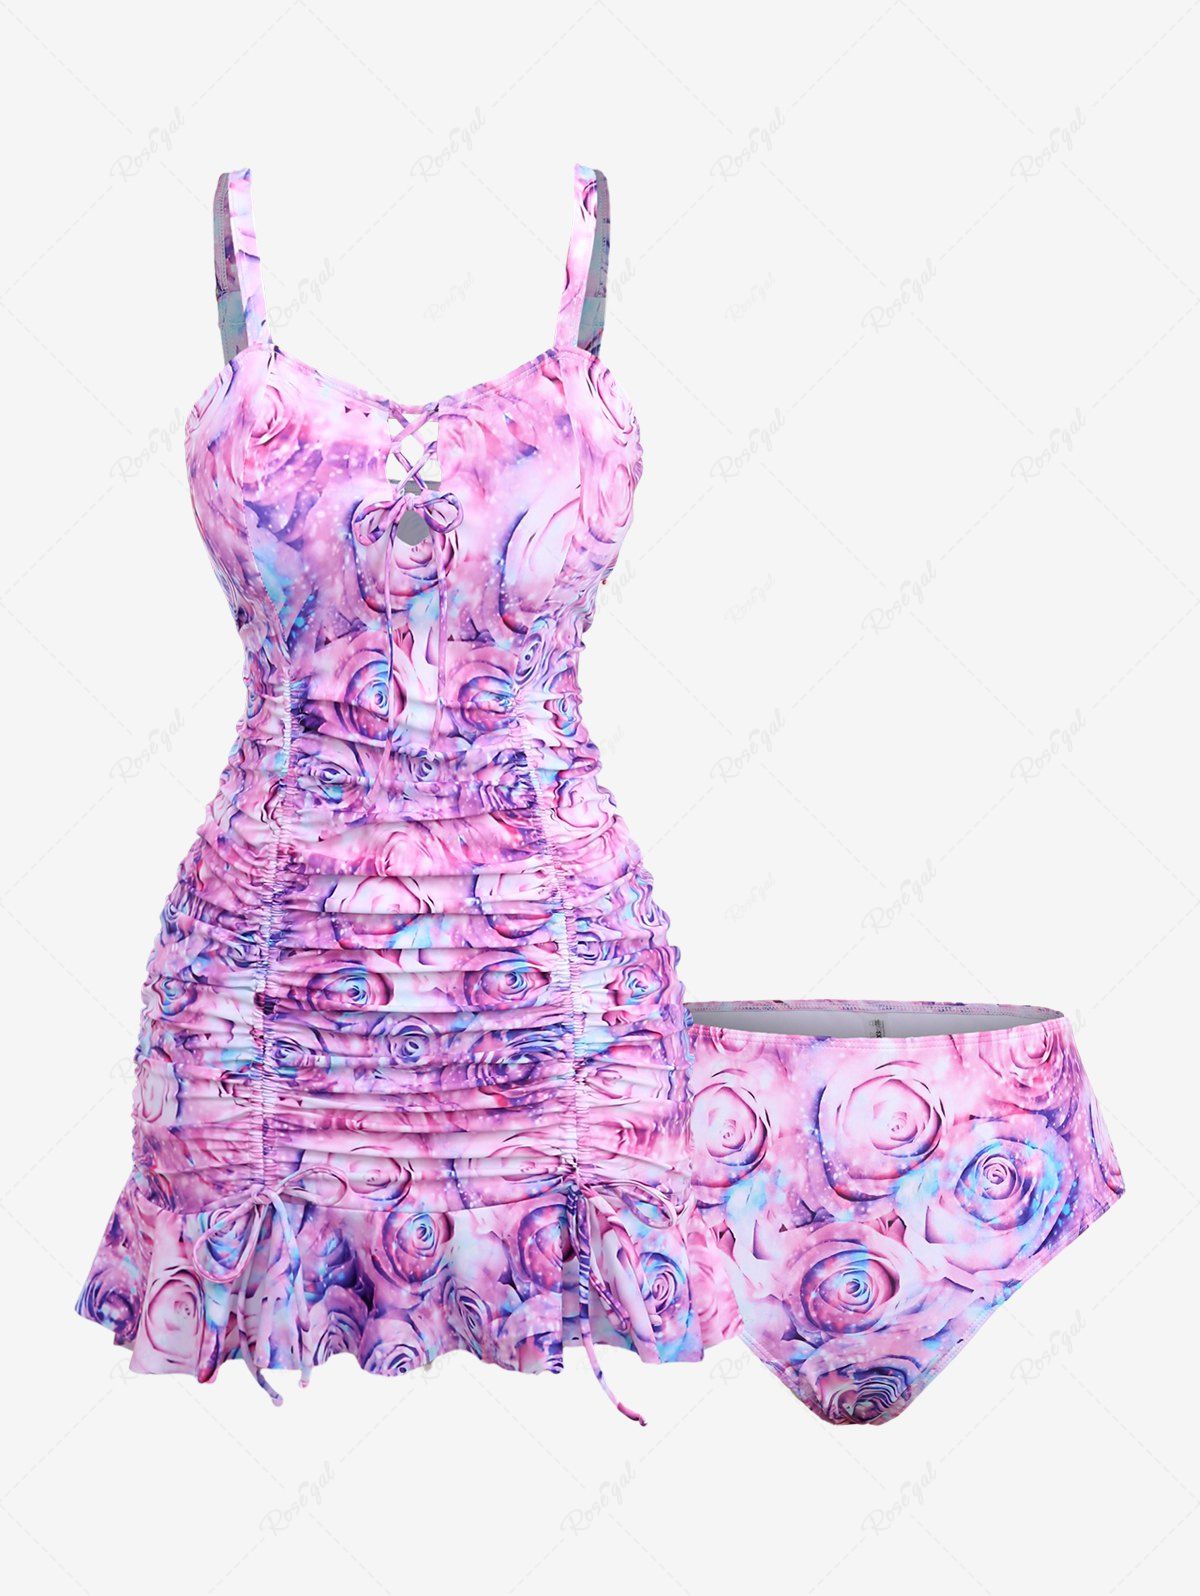 Plus Size Rose Flower Glitter 3D Print Lace Up Cinched Ruched Ruffles Tankini Set Pourpre  4X | US 26-28